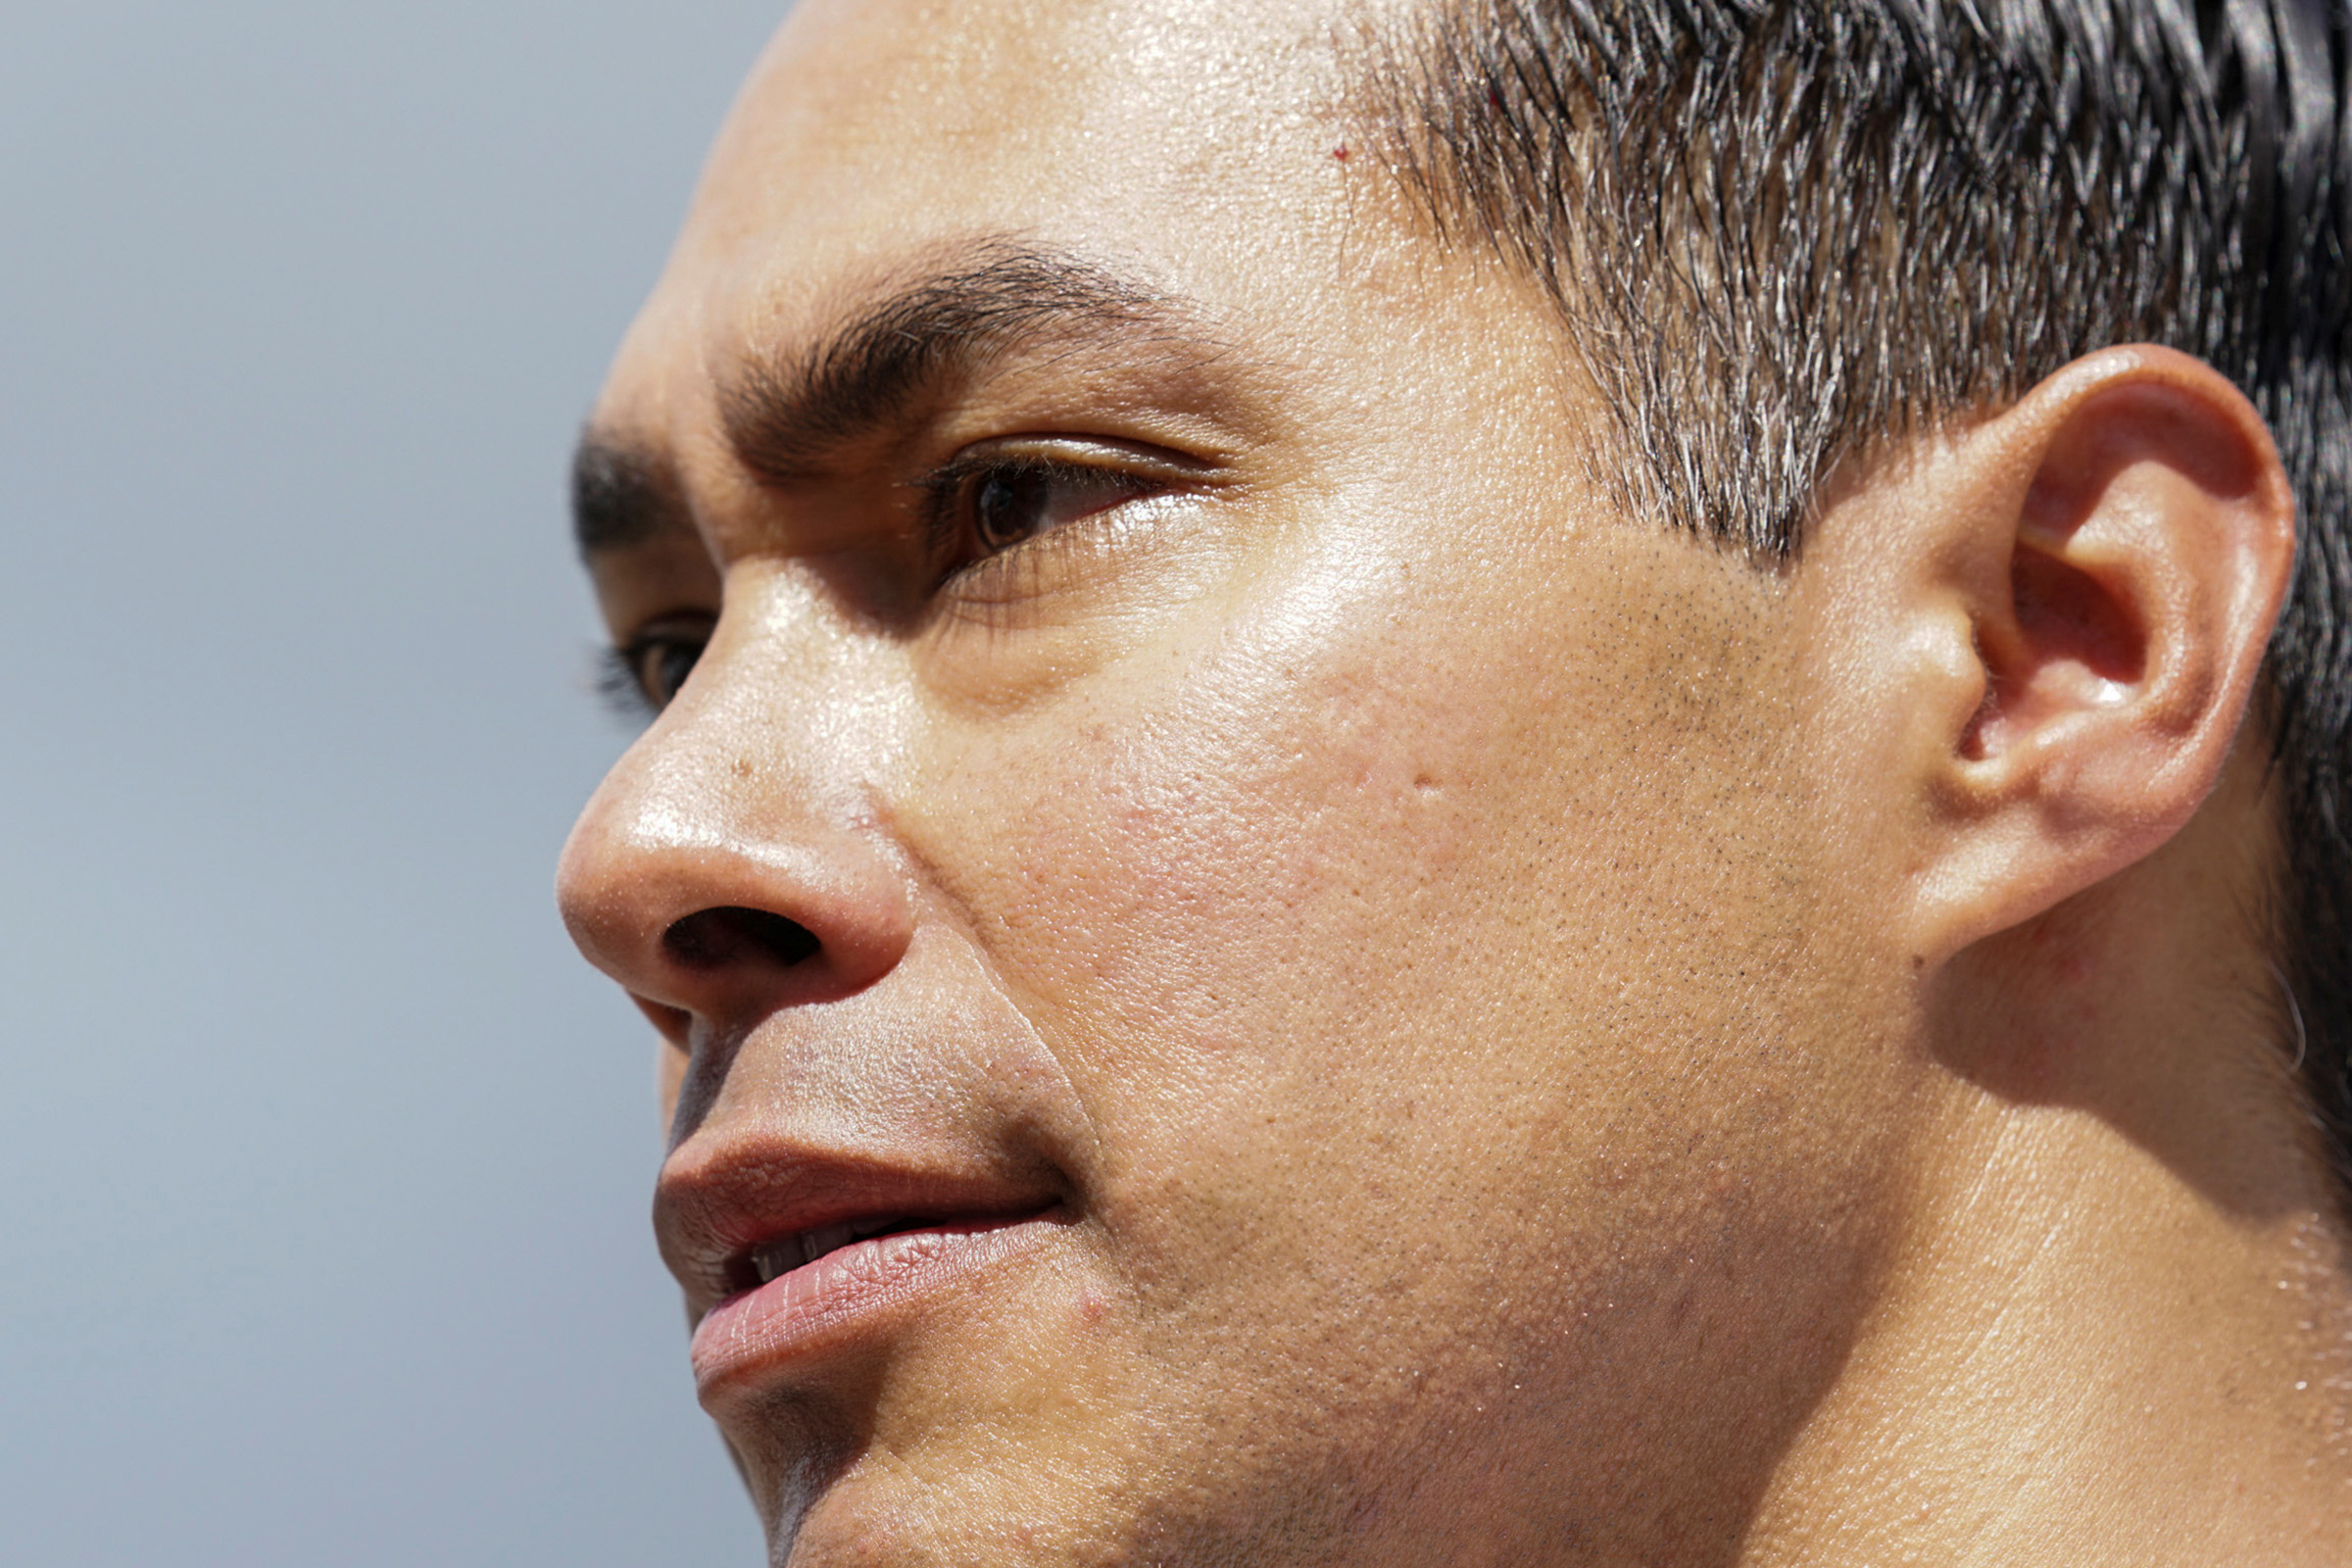 Democratic presidential candidate Julián Castro addresses the media after visiting refugees in Matamoros, Mexico, who are attempting to seek asylum in the U.S, in Brownsville, Texas, on Oct. 7, 2019. (Veronica G. Cardenas—Reuters)